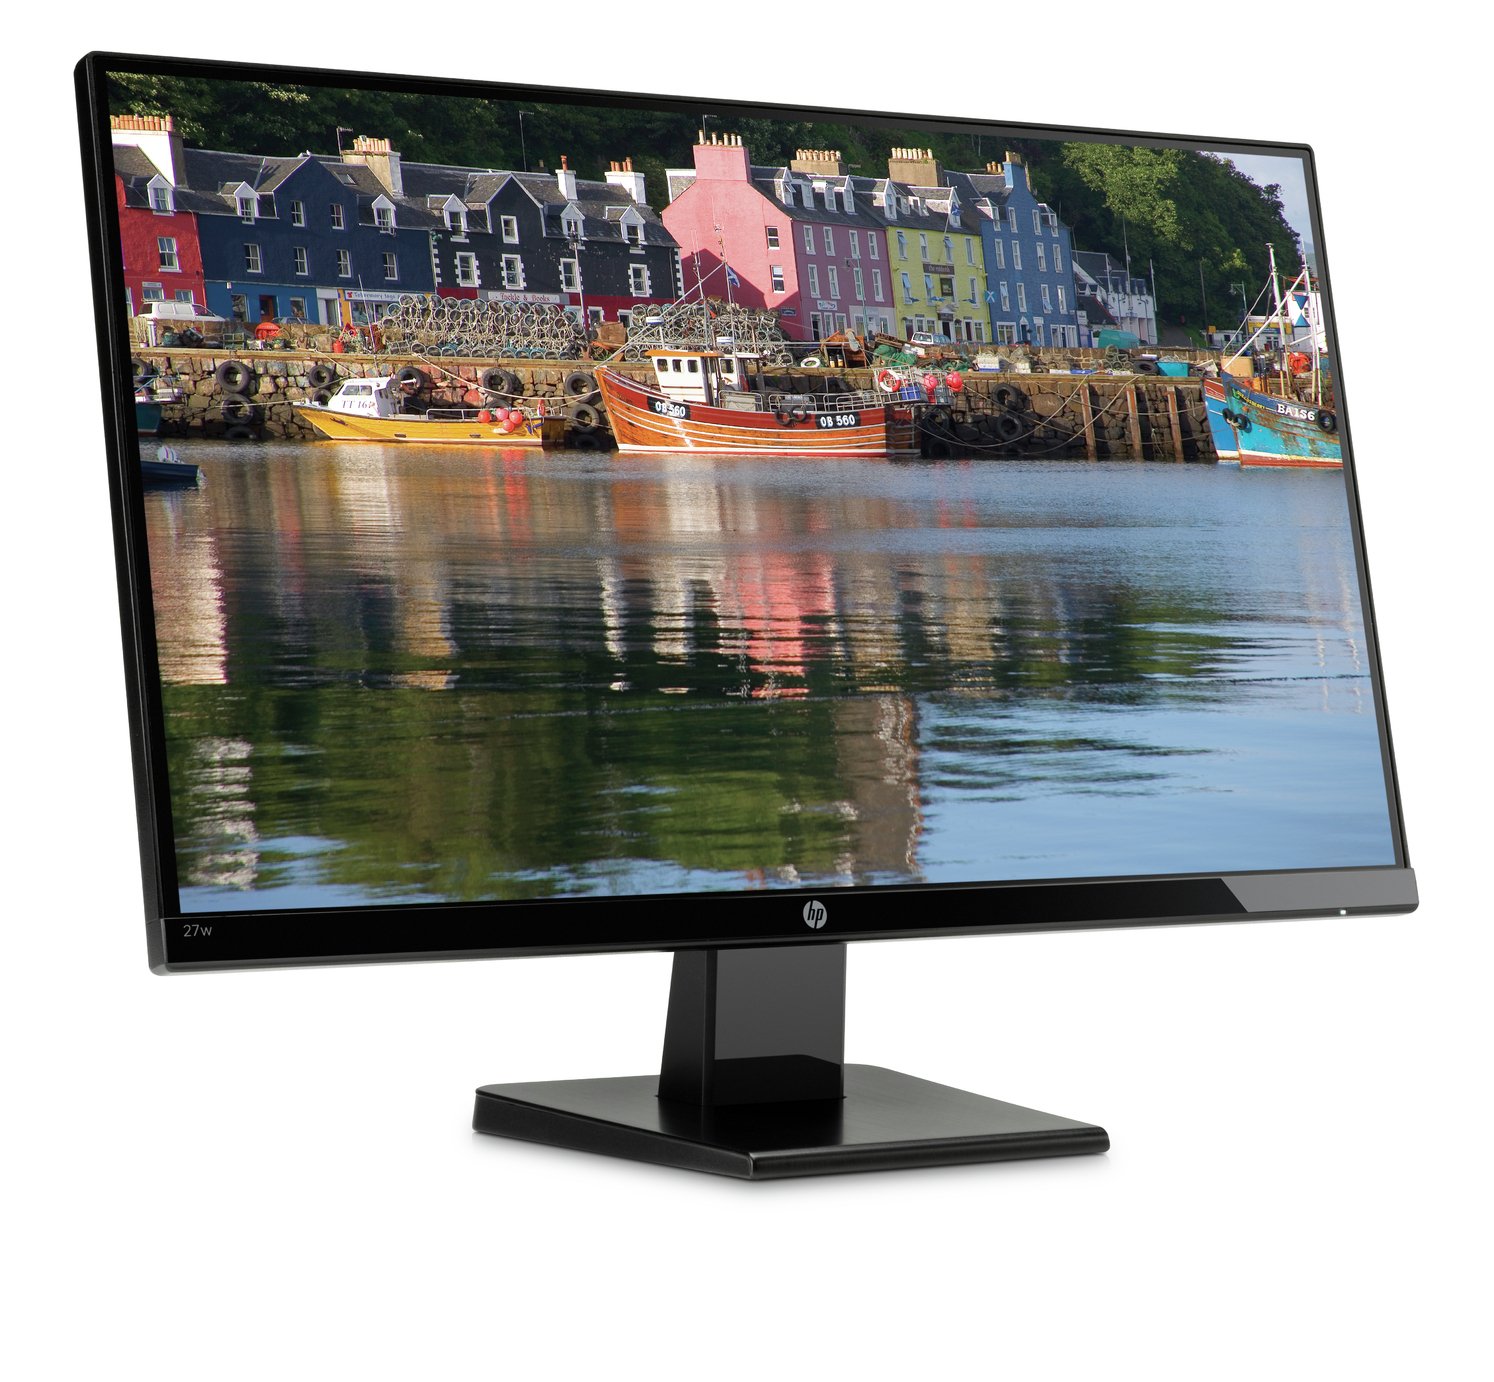 HP 27w 27inch FHD IPS Monitor Review